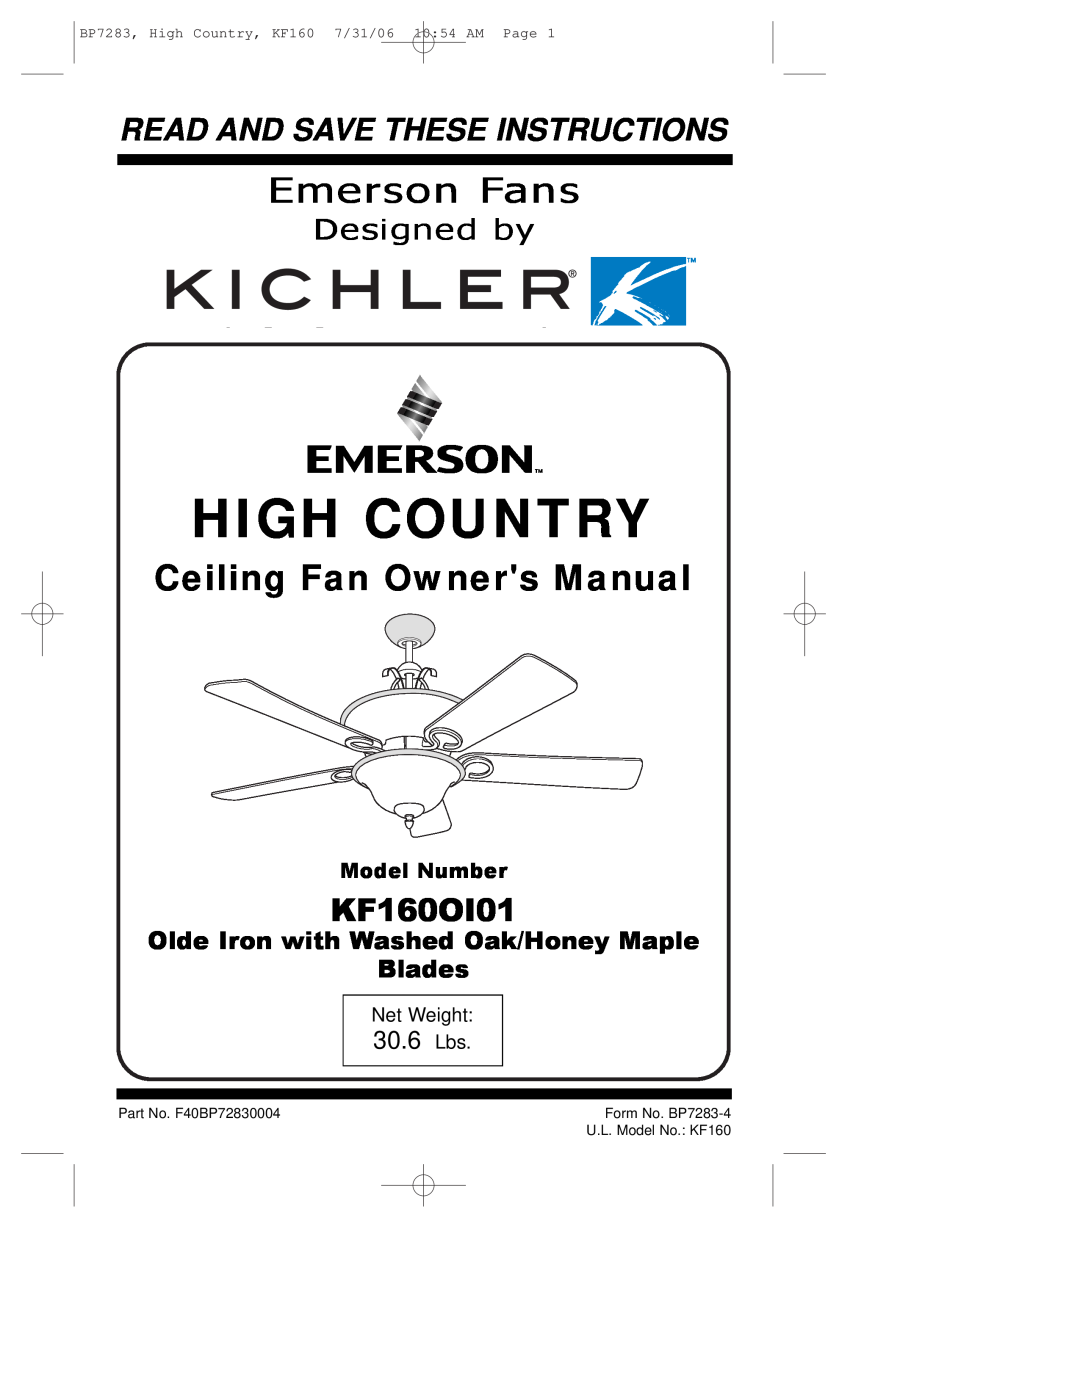 Emerson KF160OI01 owner manual High Country, Emerson Fans, Read And Save These Instructions, Designed by, Model Number 